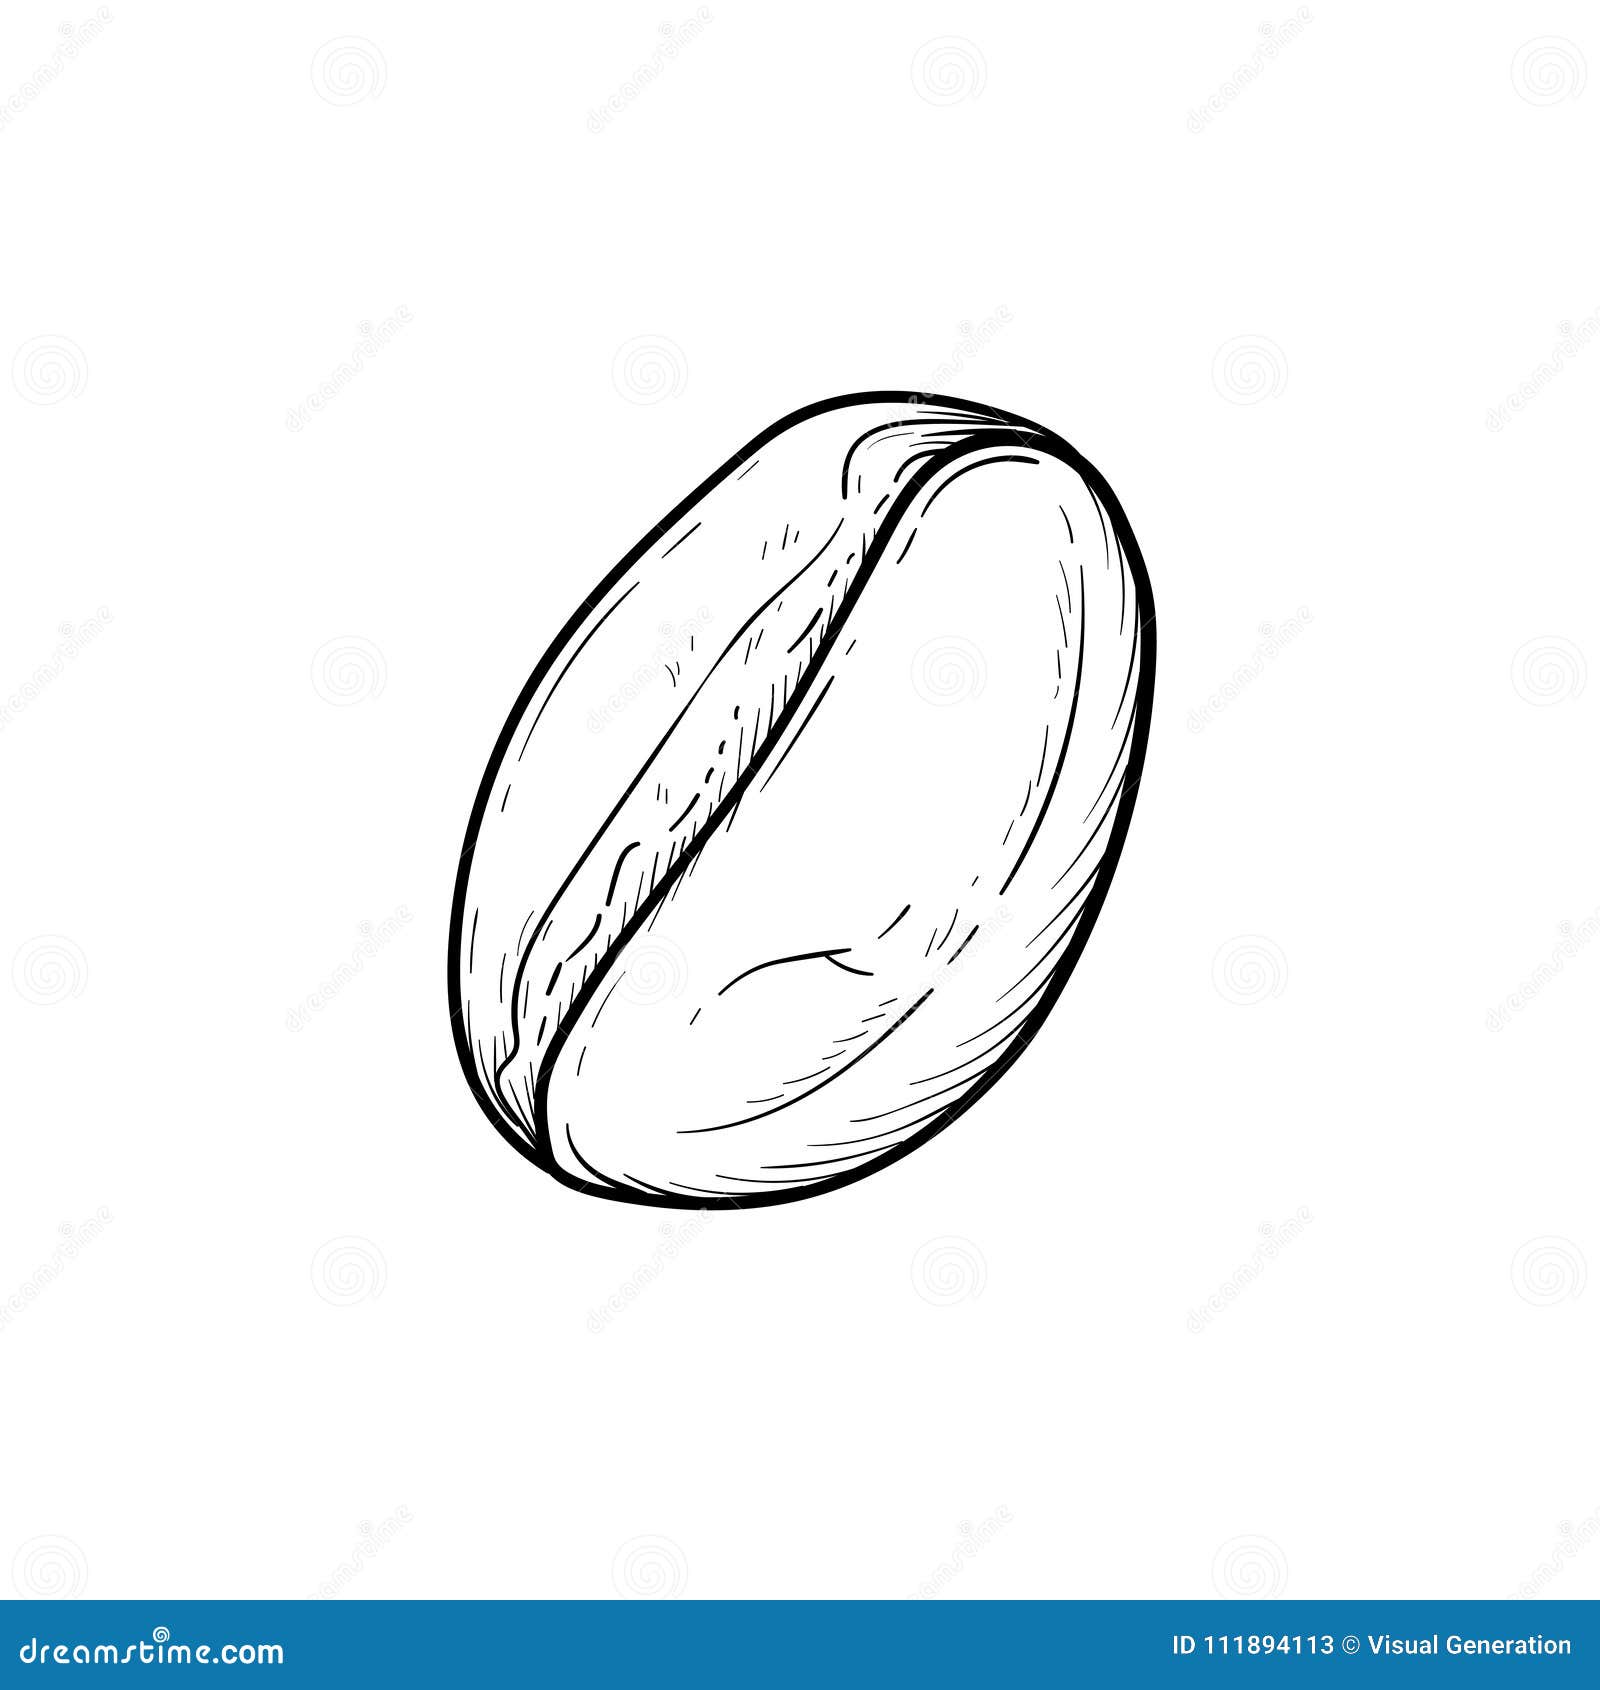 Coffee Bean Hand Drawn Sketch Icon. Stock Vector - Illustration of ...